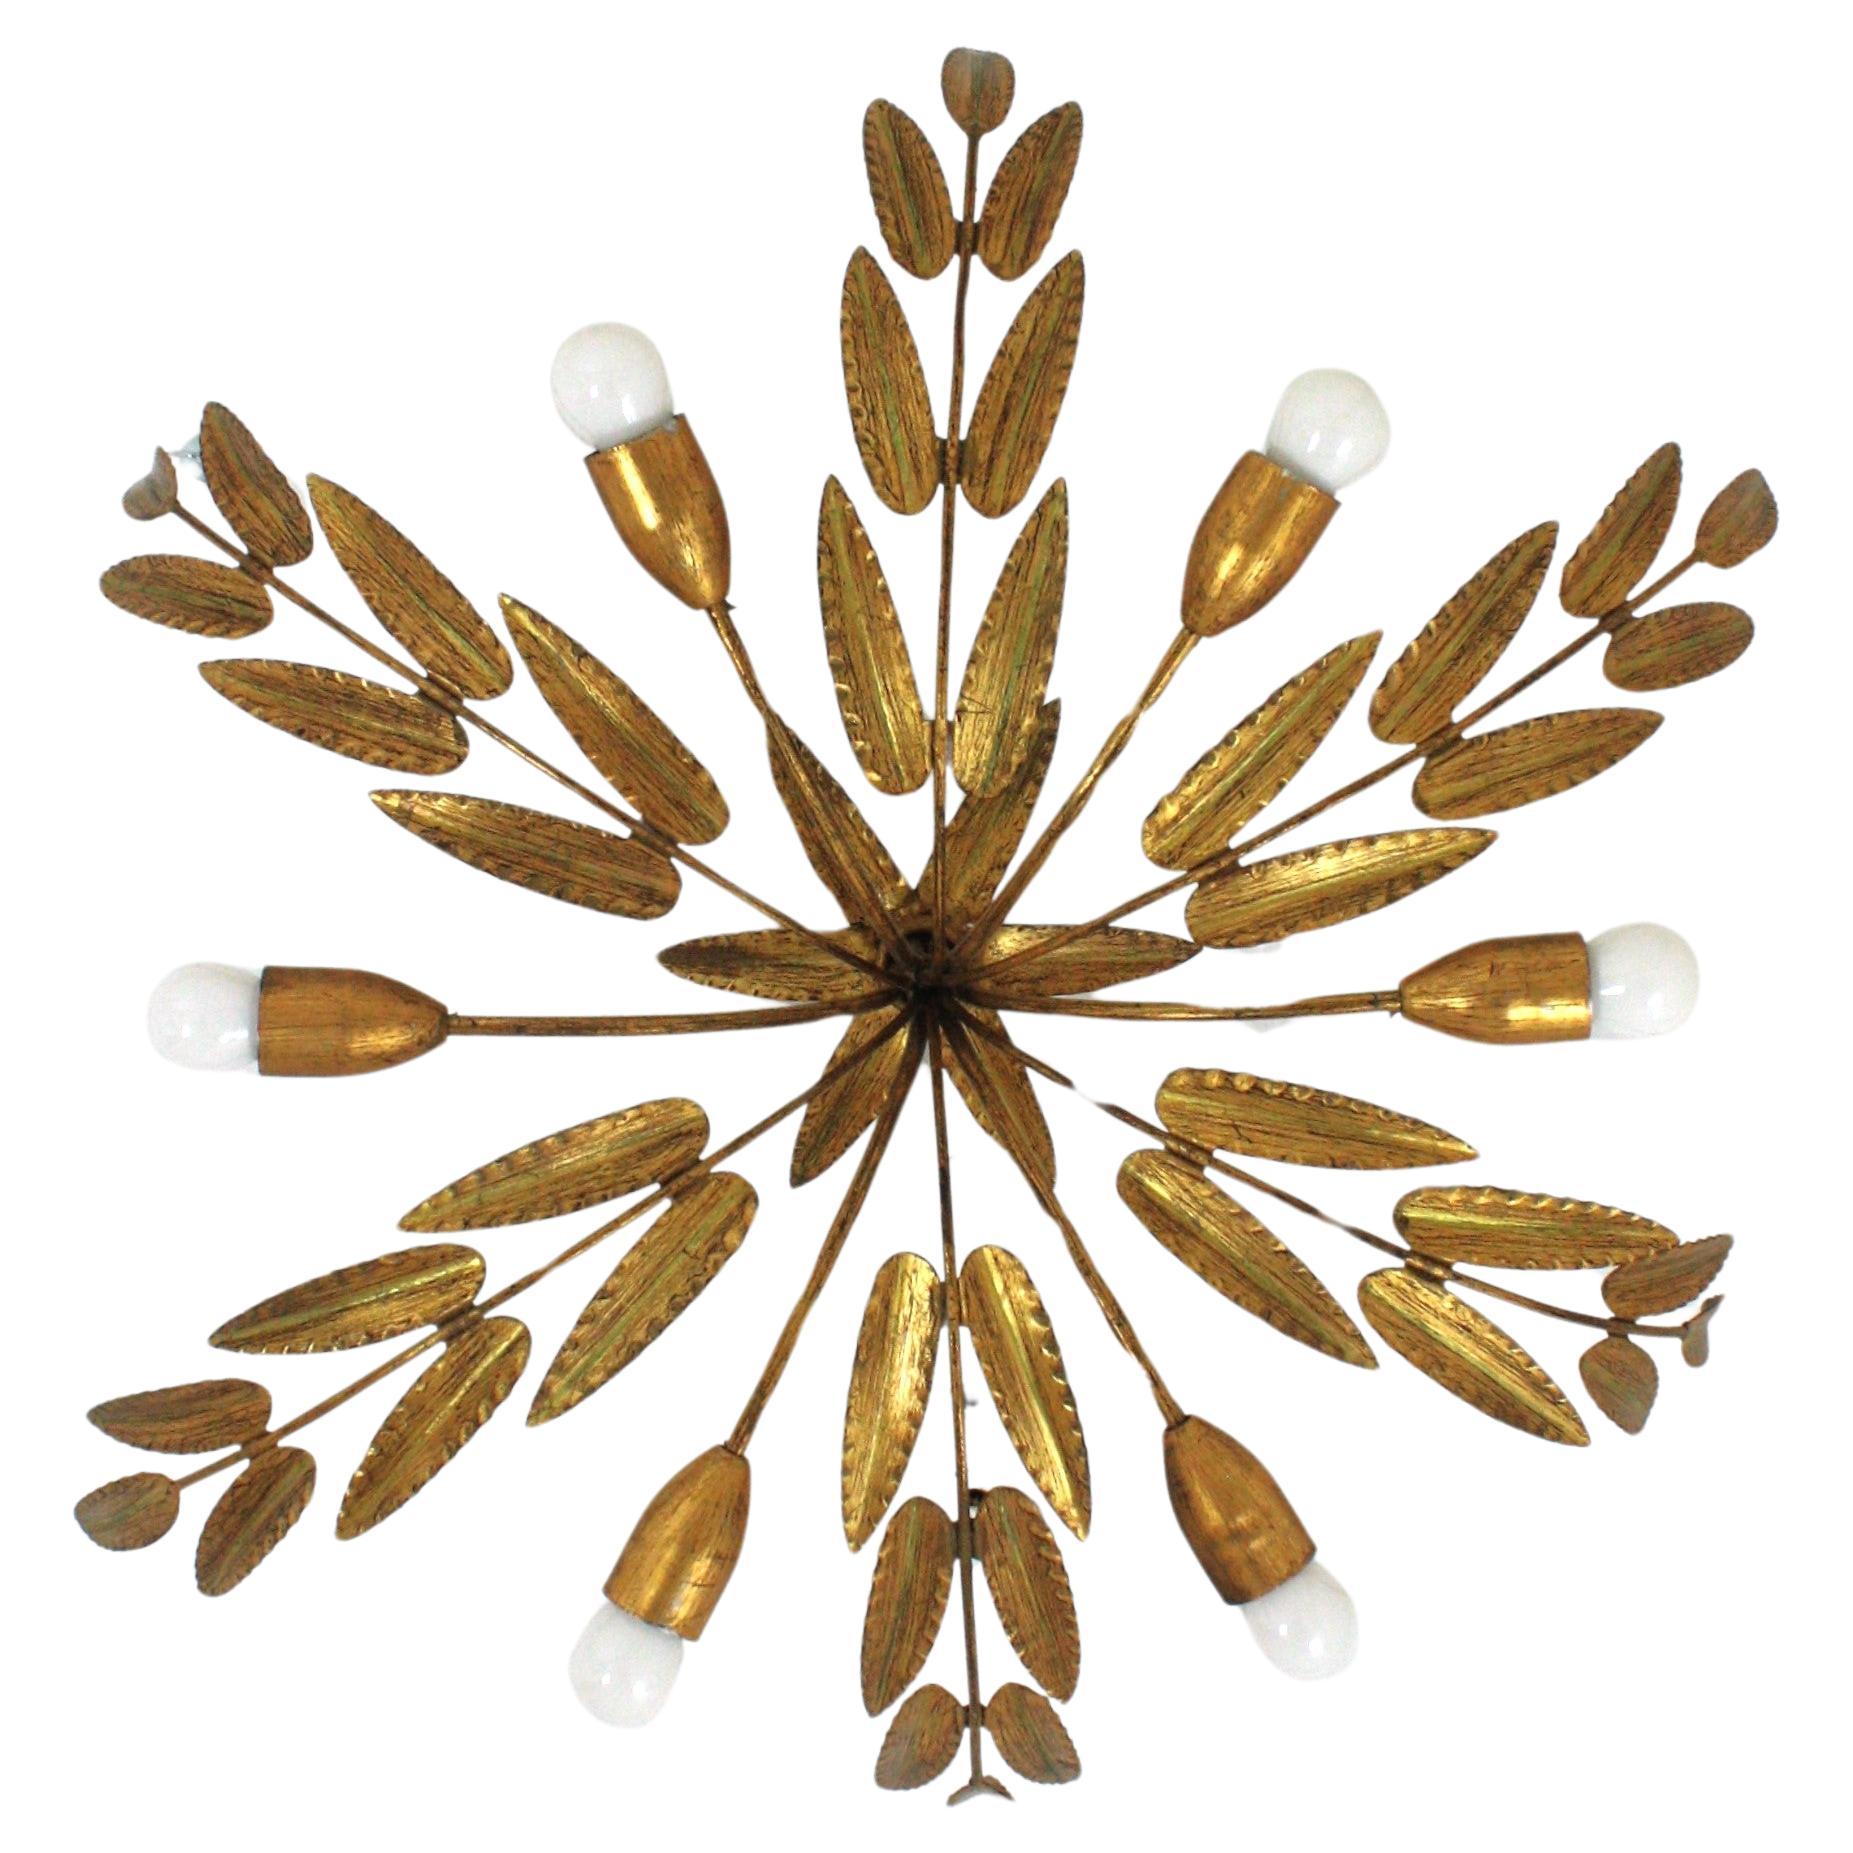 Outstanding spanish foliage sunburst flush mount ceiling light in gilt iron, Ferro Art, 1950s
Extra Large size ( 34,6 inches diameter). Six Lights.
To be used as ceiling light fixture or as chandelier / pendant light adding a chain to the desired